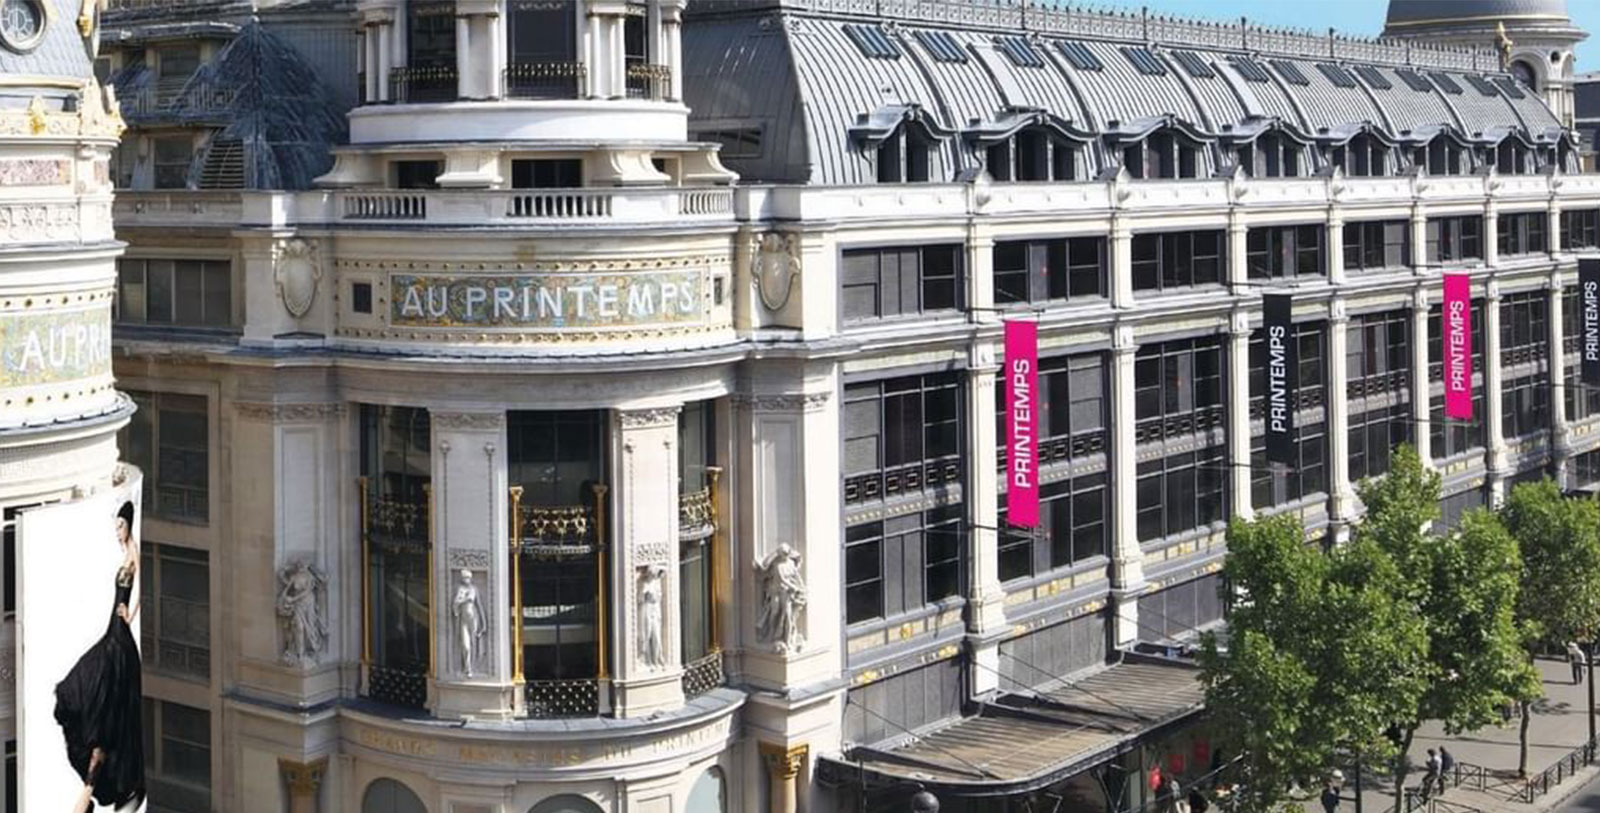 Explore the nearby Au Printemps, a luxury department store dating to the 19th century.